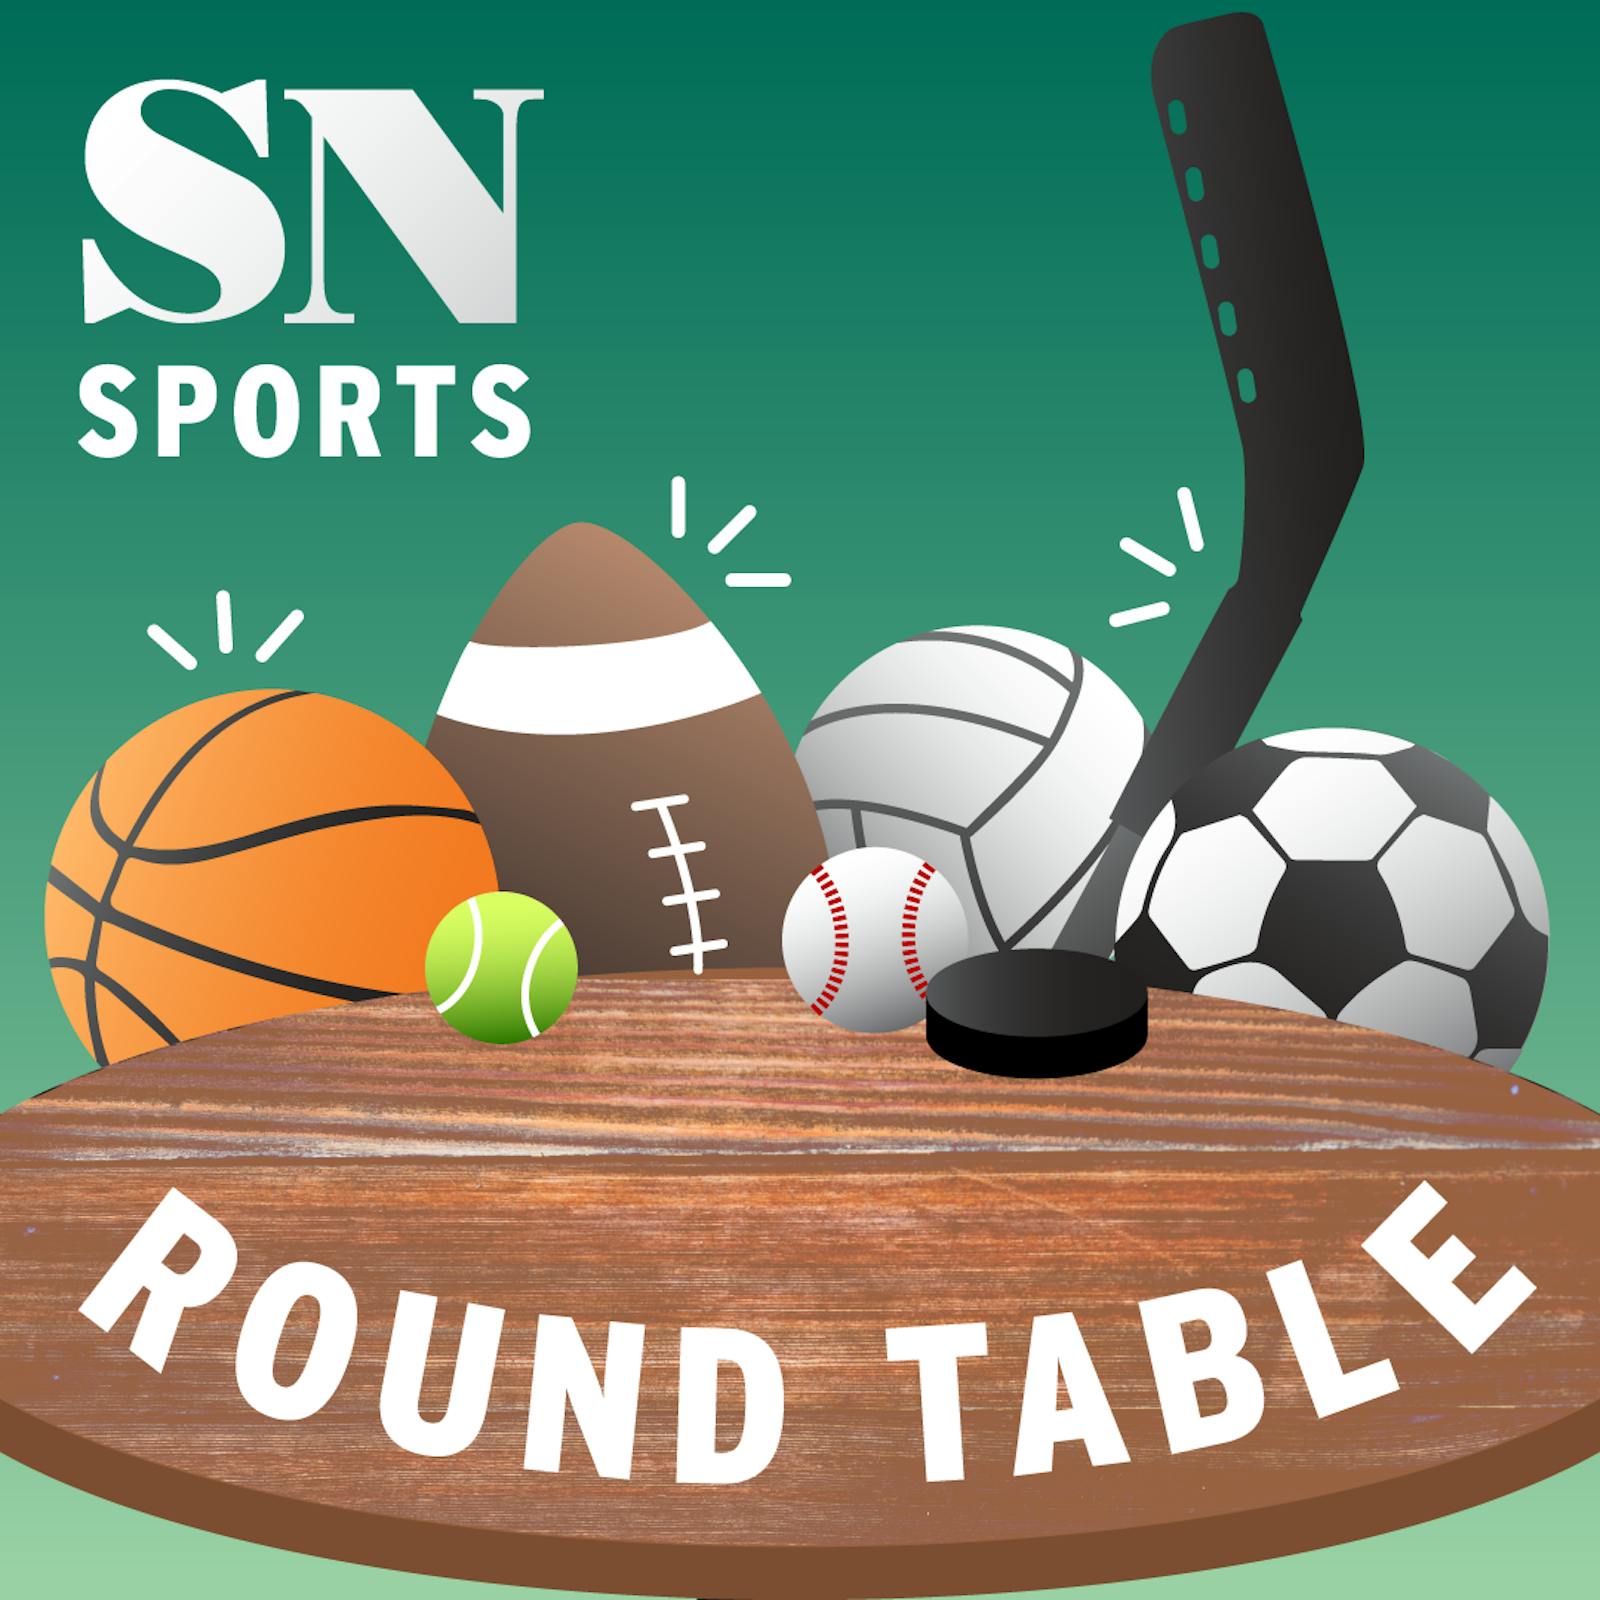 The Trivia Championship at the Sports Roundtable